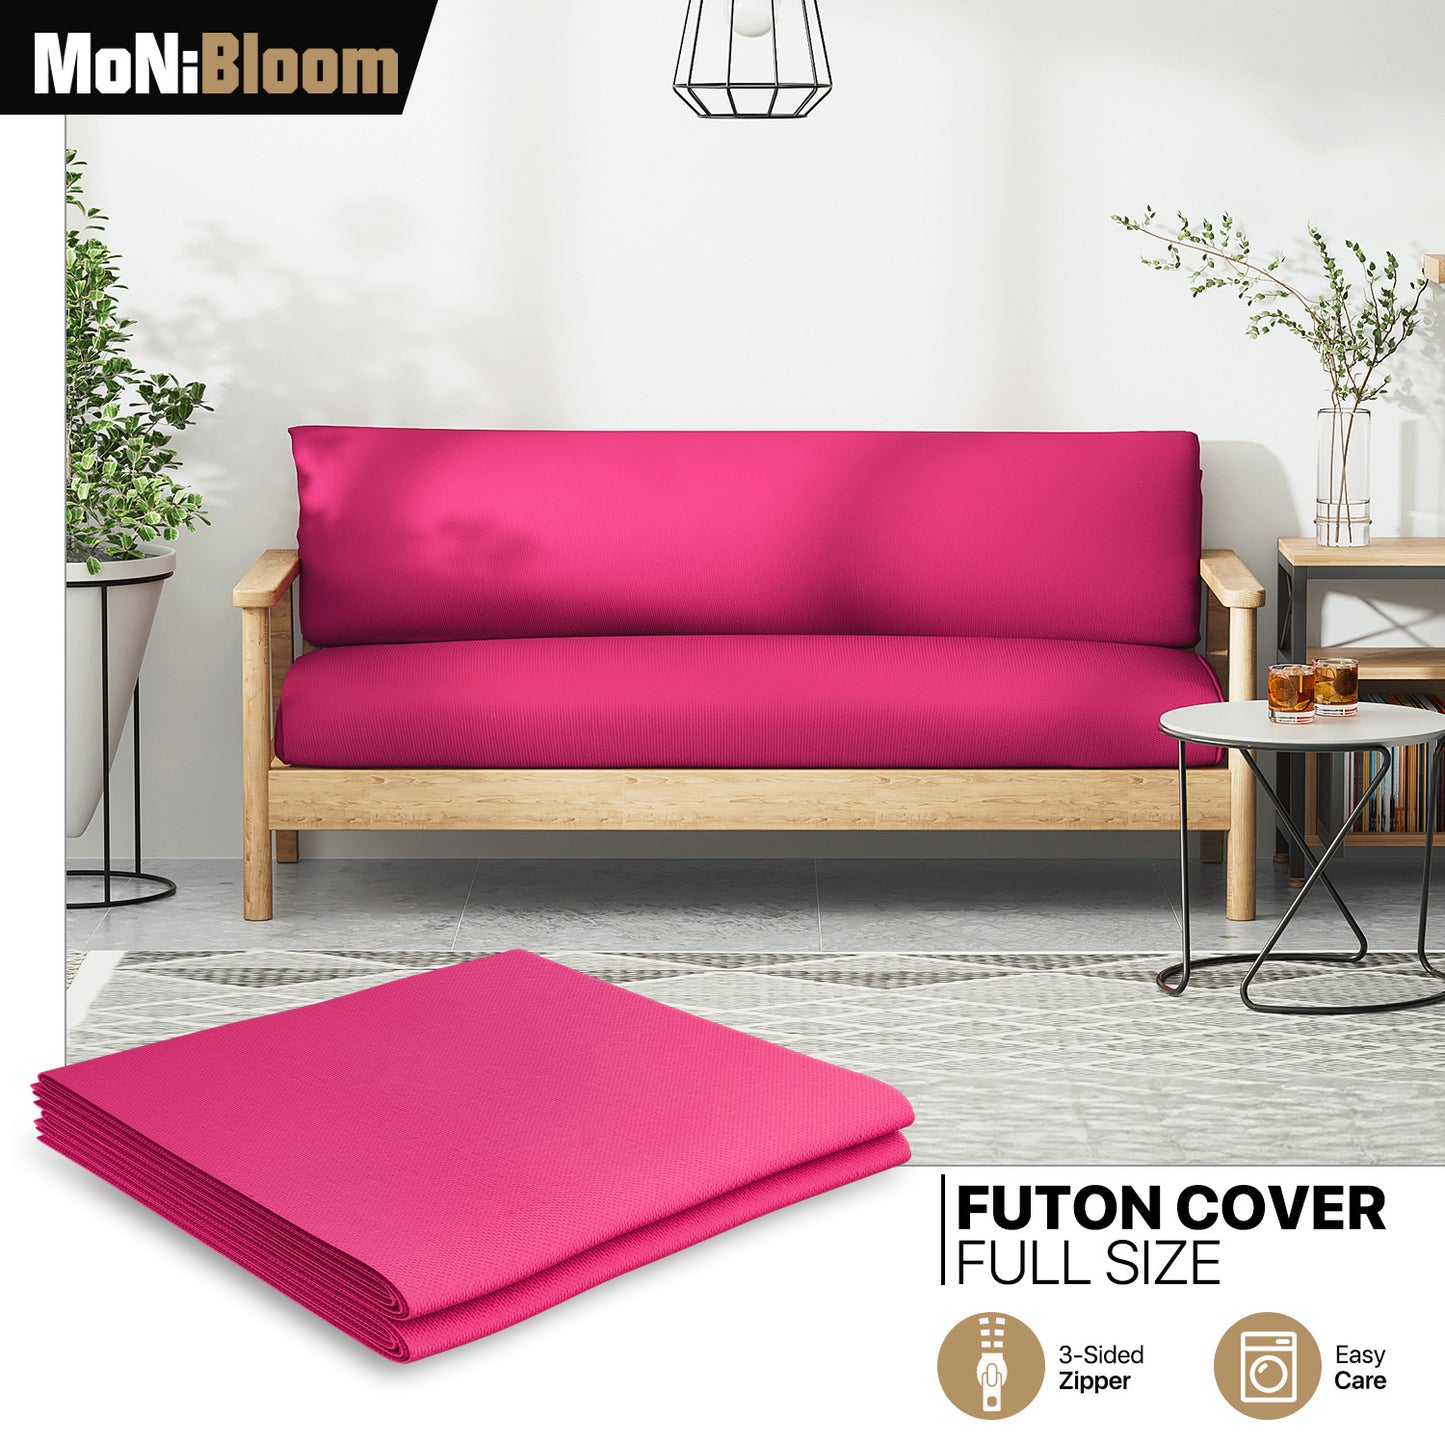 Futon Cover - Polyester - Full Size 54"x75"x2"